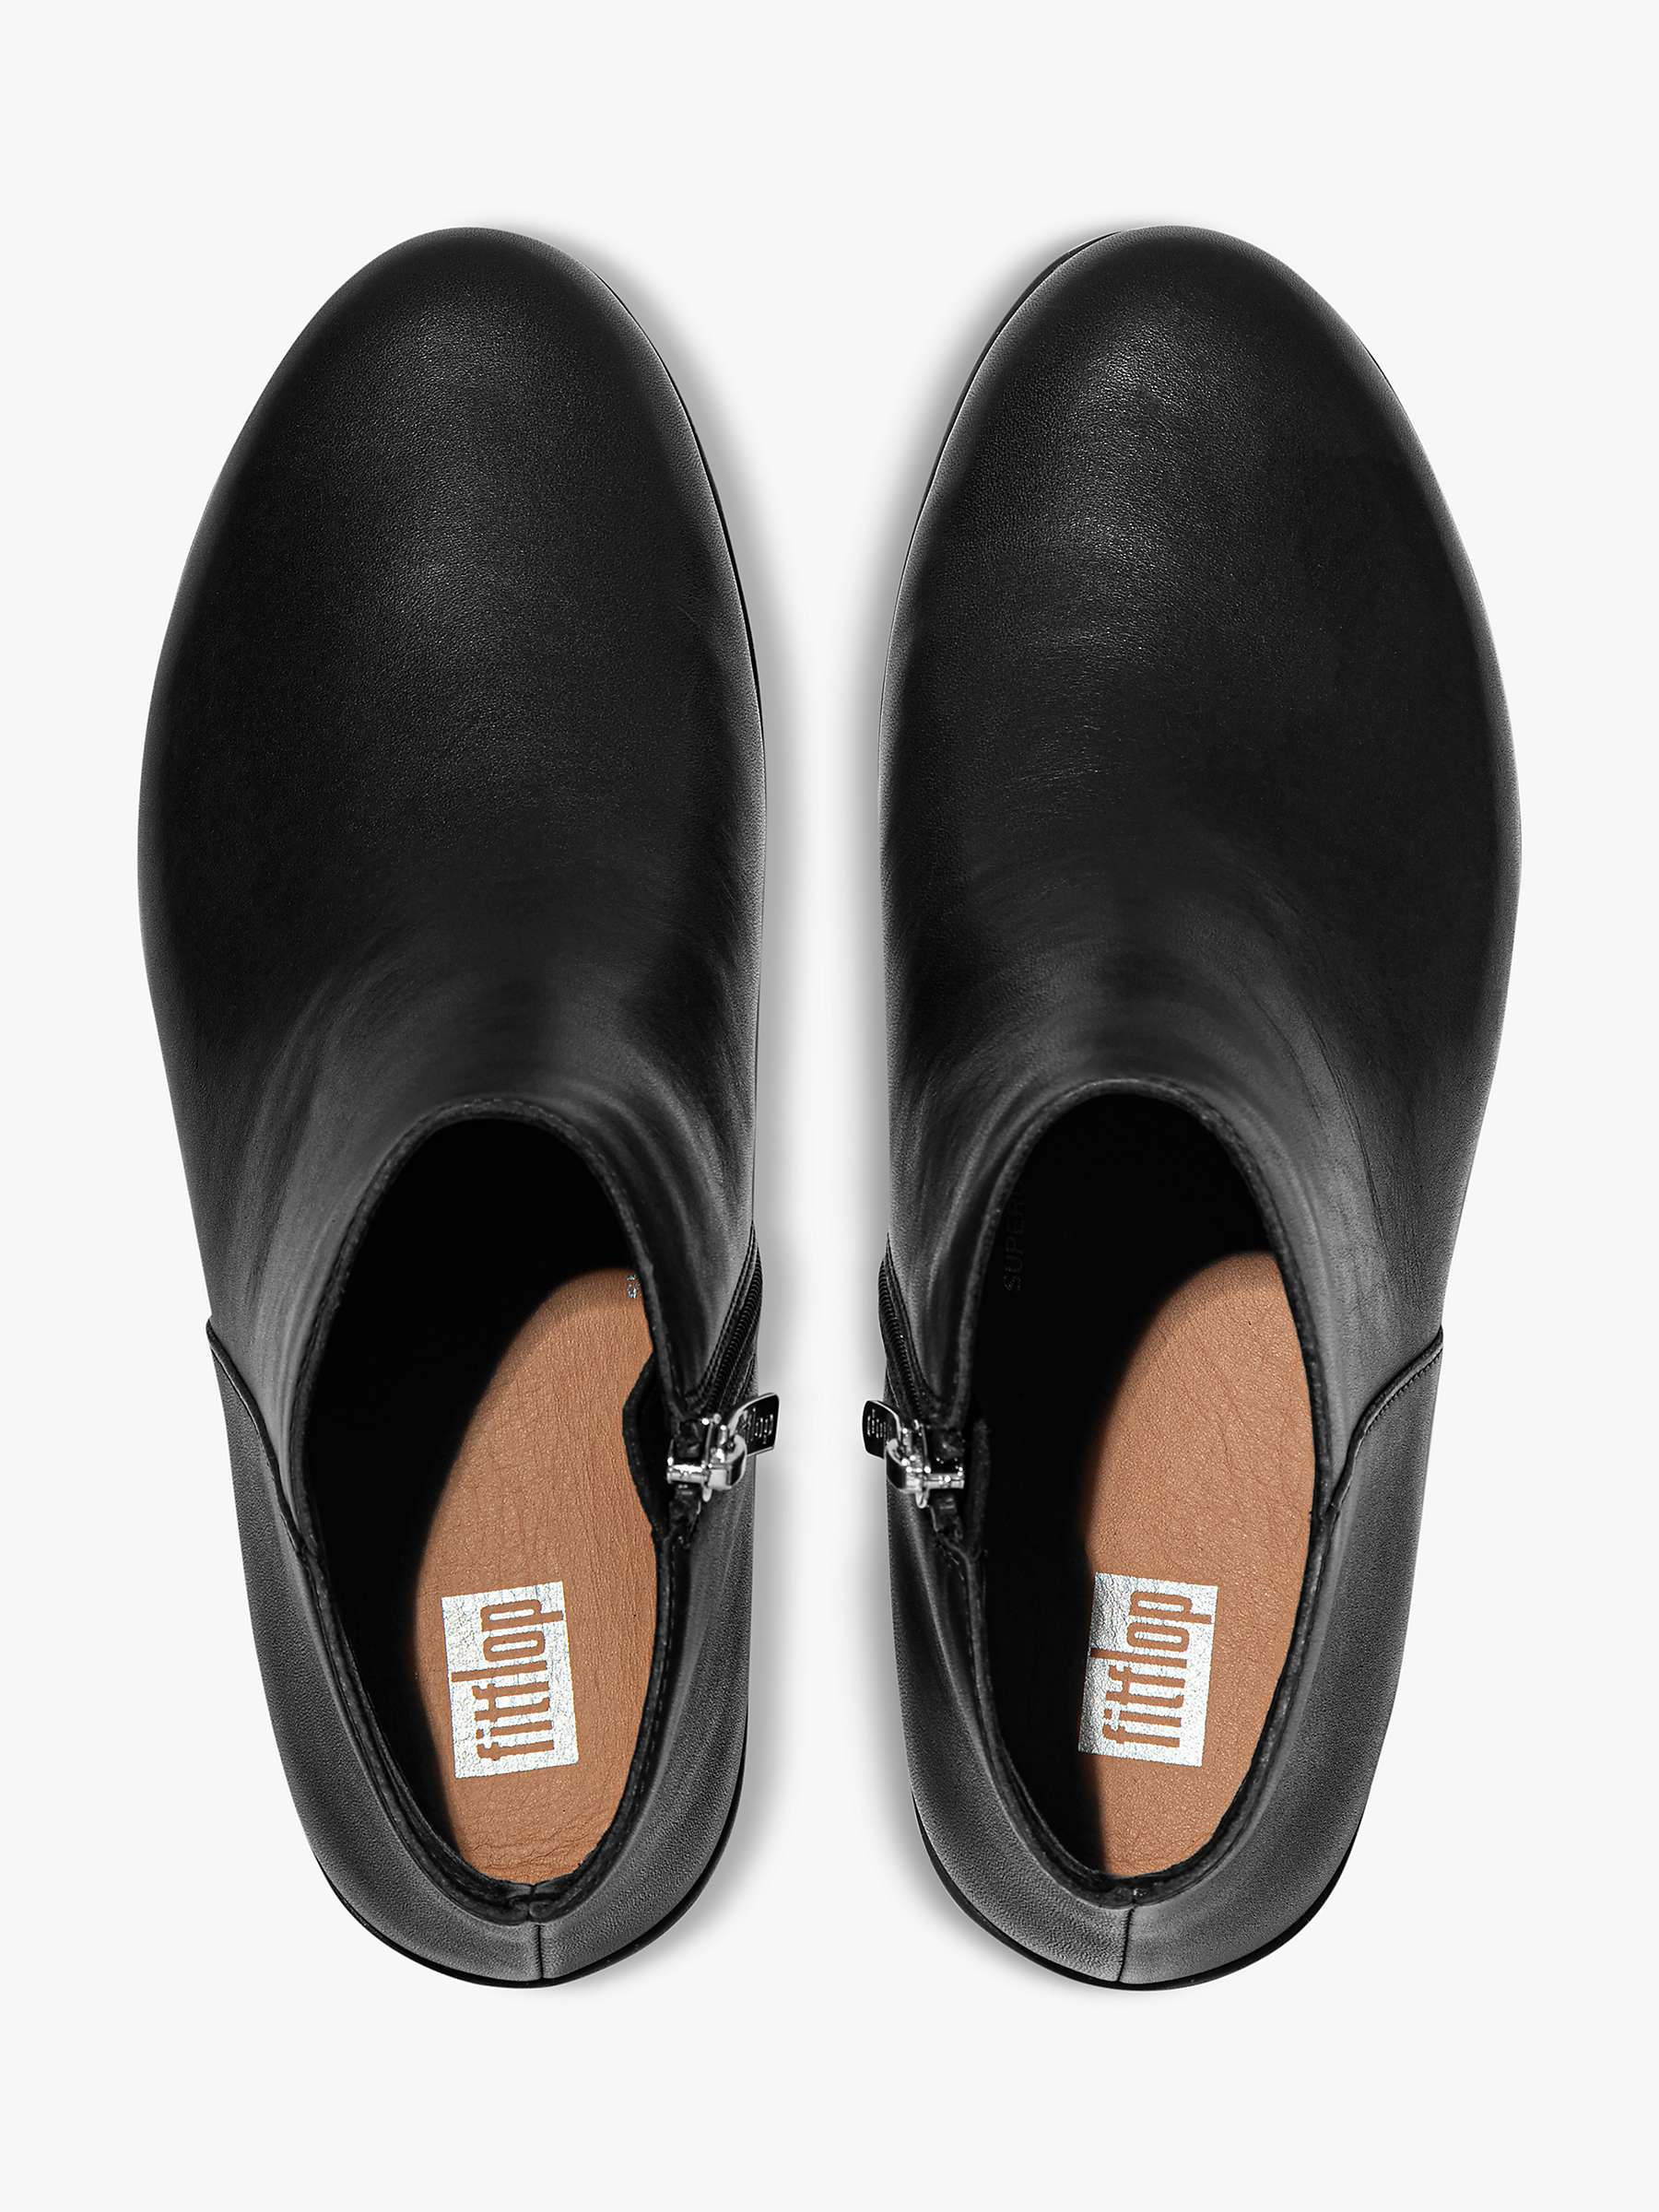 FitFlop Sumi Leather Ankle Boots, Black at John Lewis & Partners